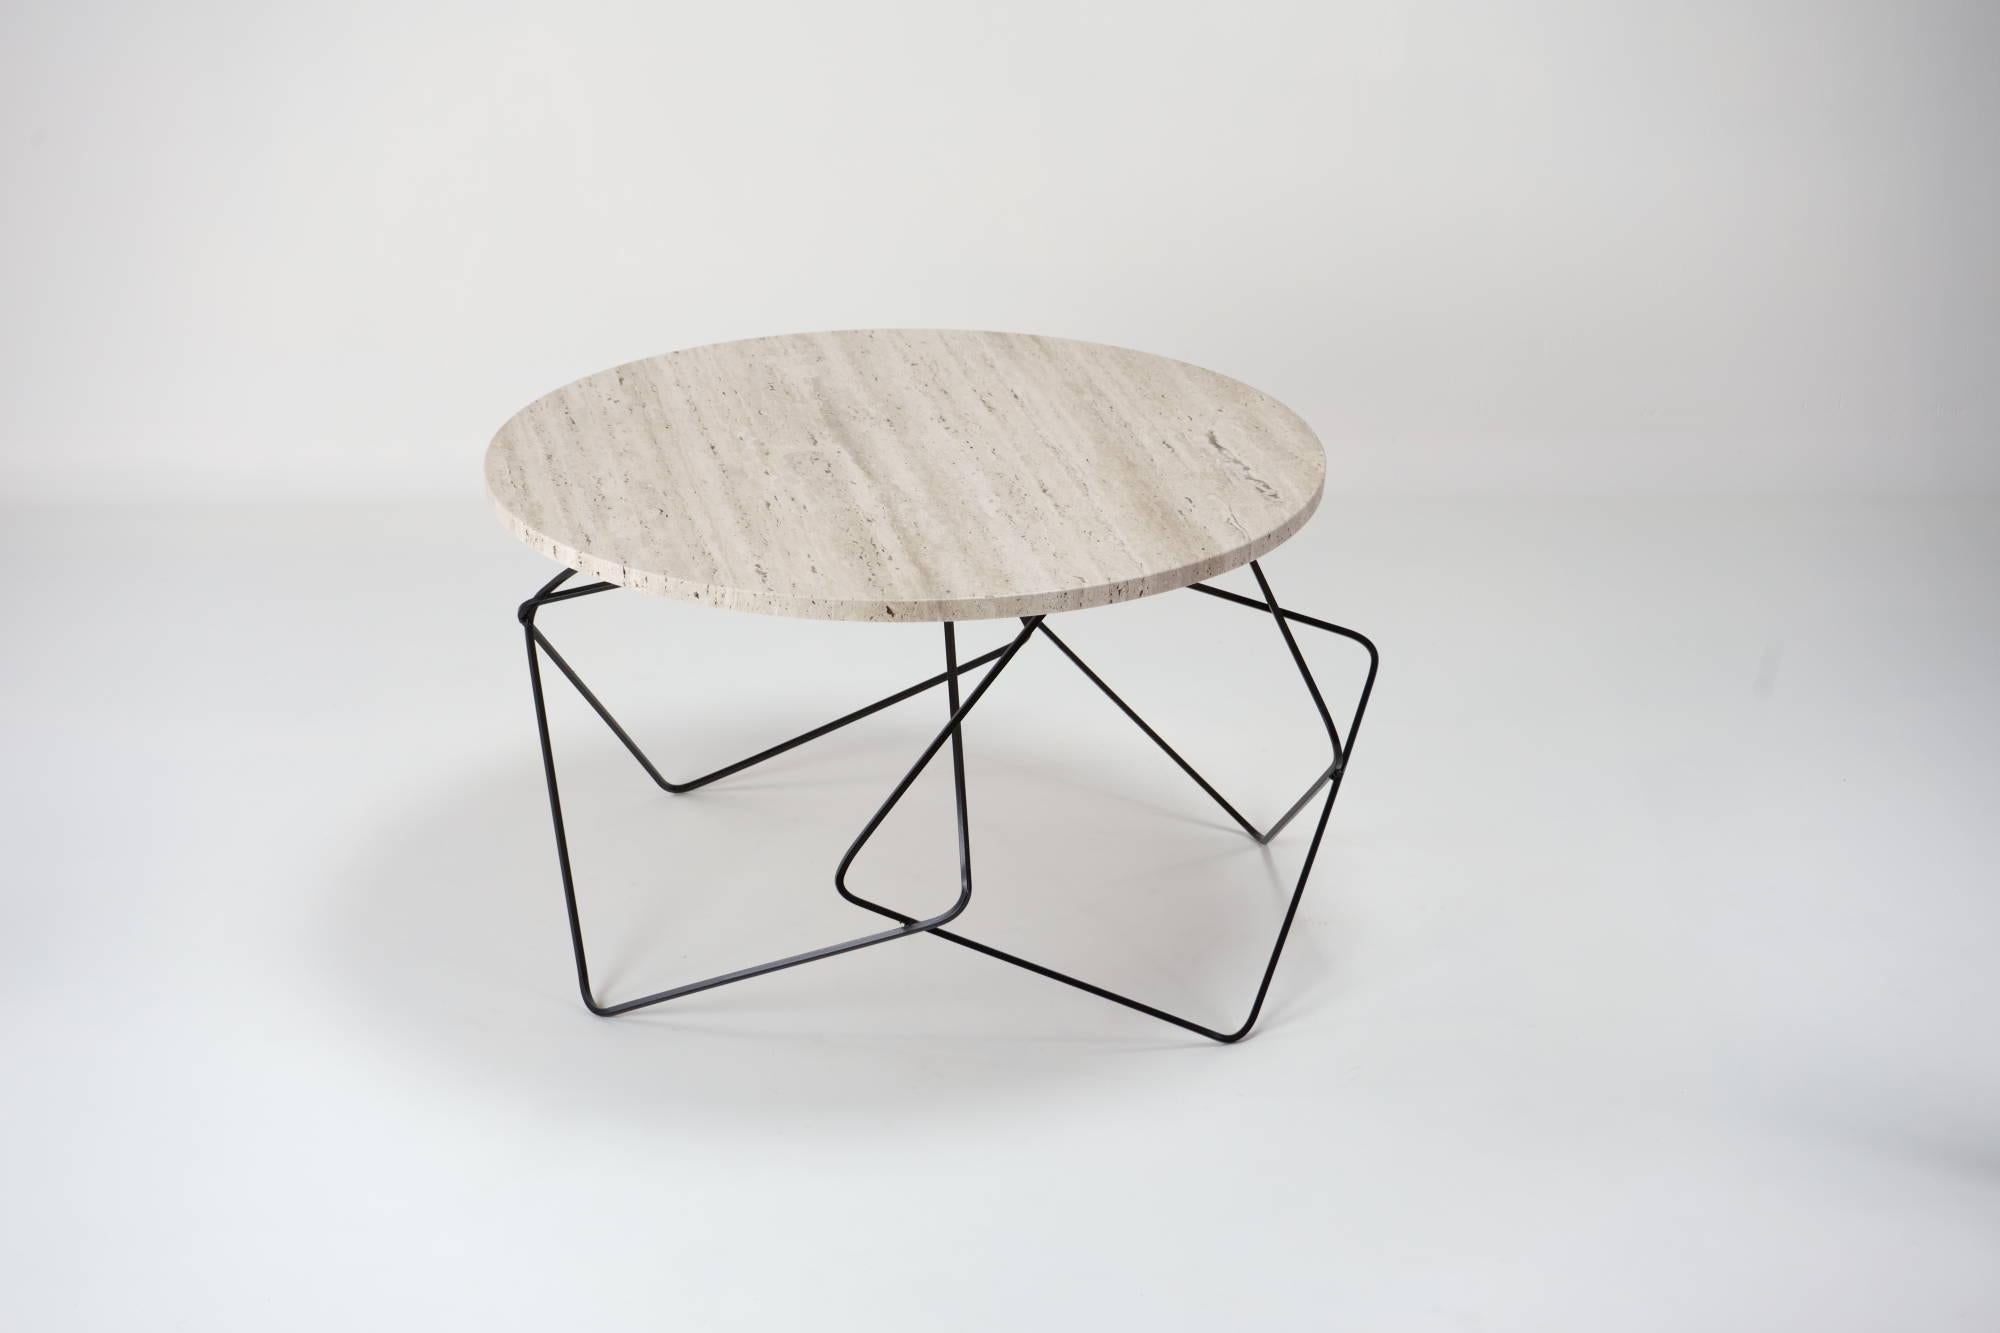 Italian Stable, Travertine Coffee Table By DFdesignlab Handmade in Italy For Sale